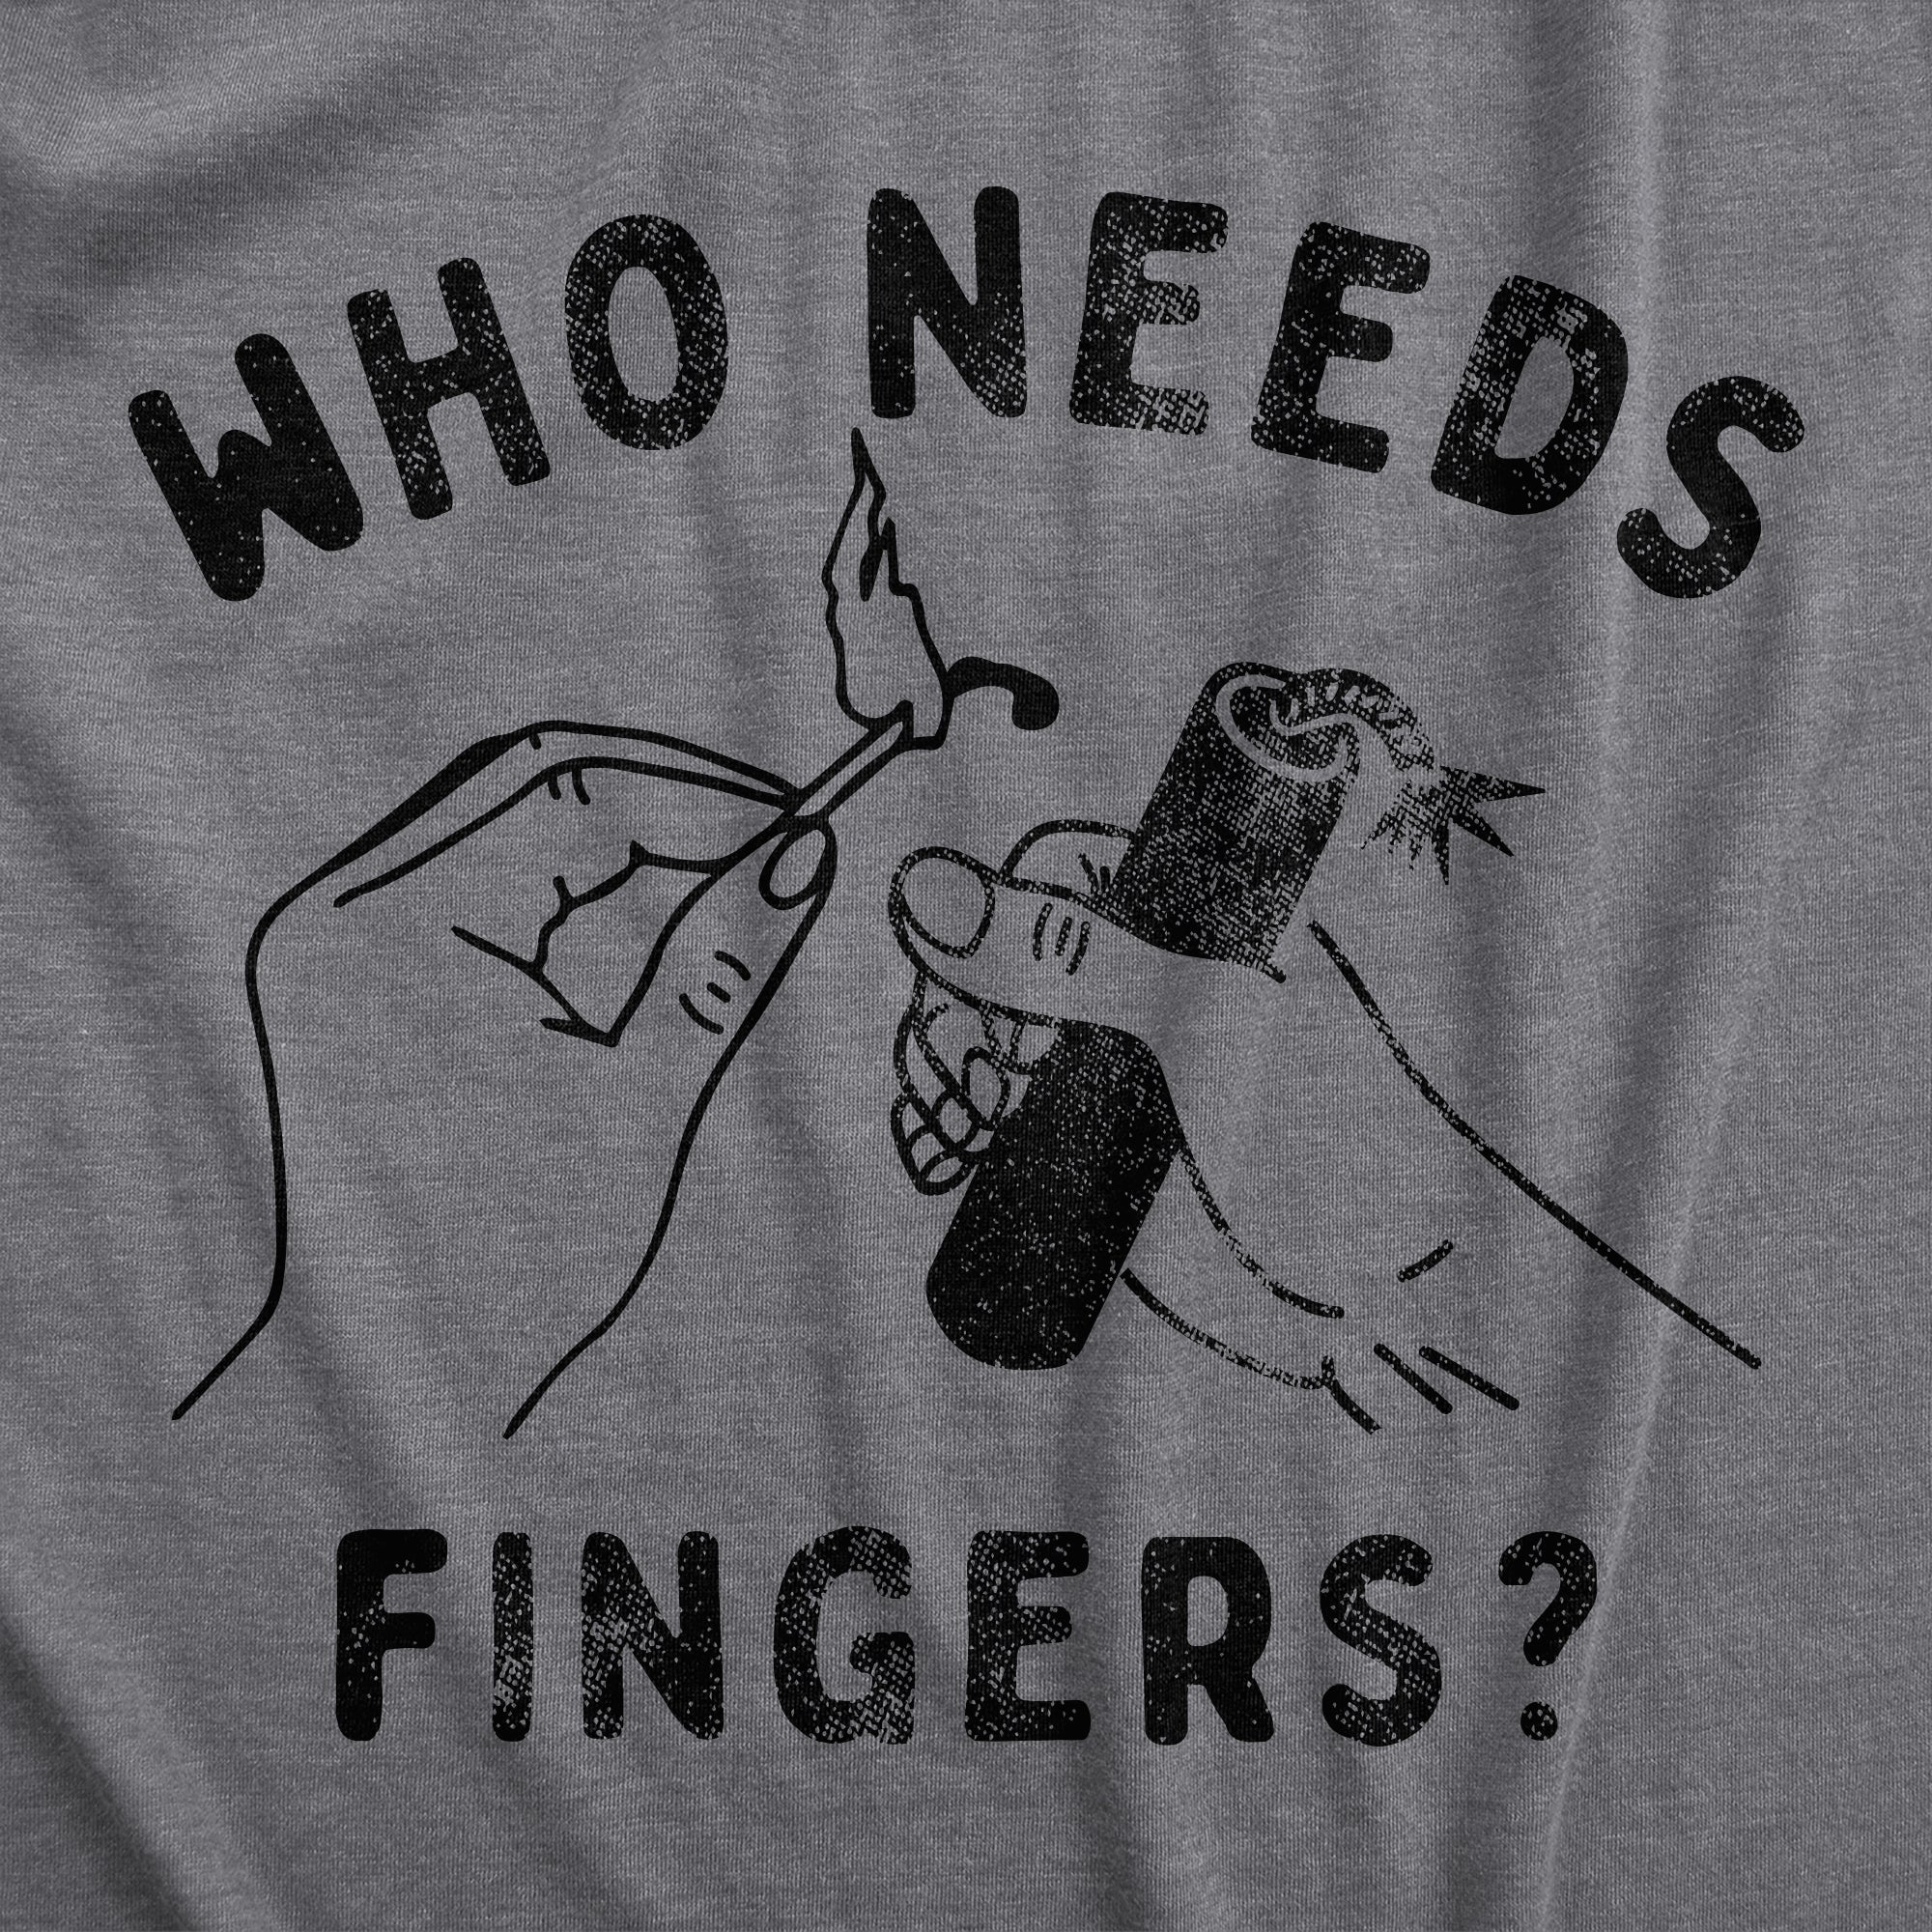 Funny Dark Heather Grey - FINGERS Who Needs Fingers Womens T Shirt Nerdy Fourth of July Sarcastic Tee